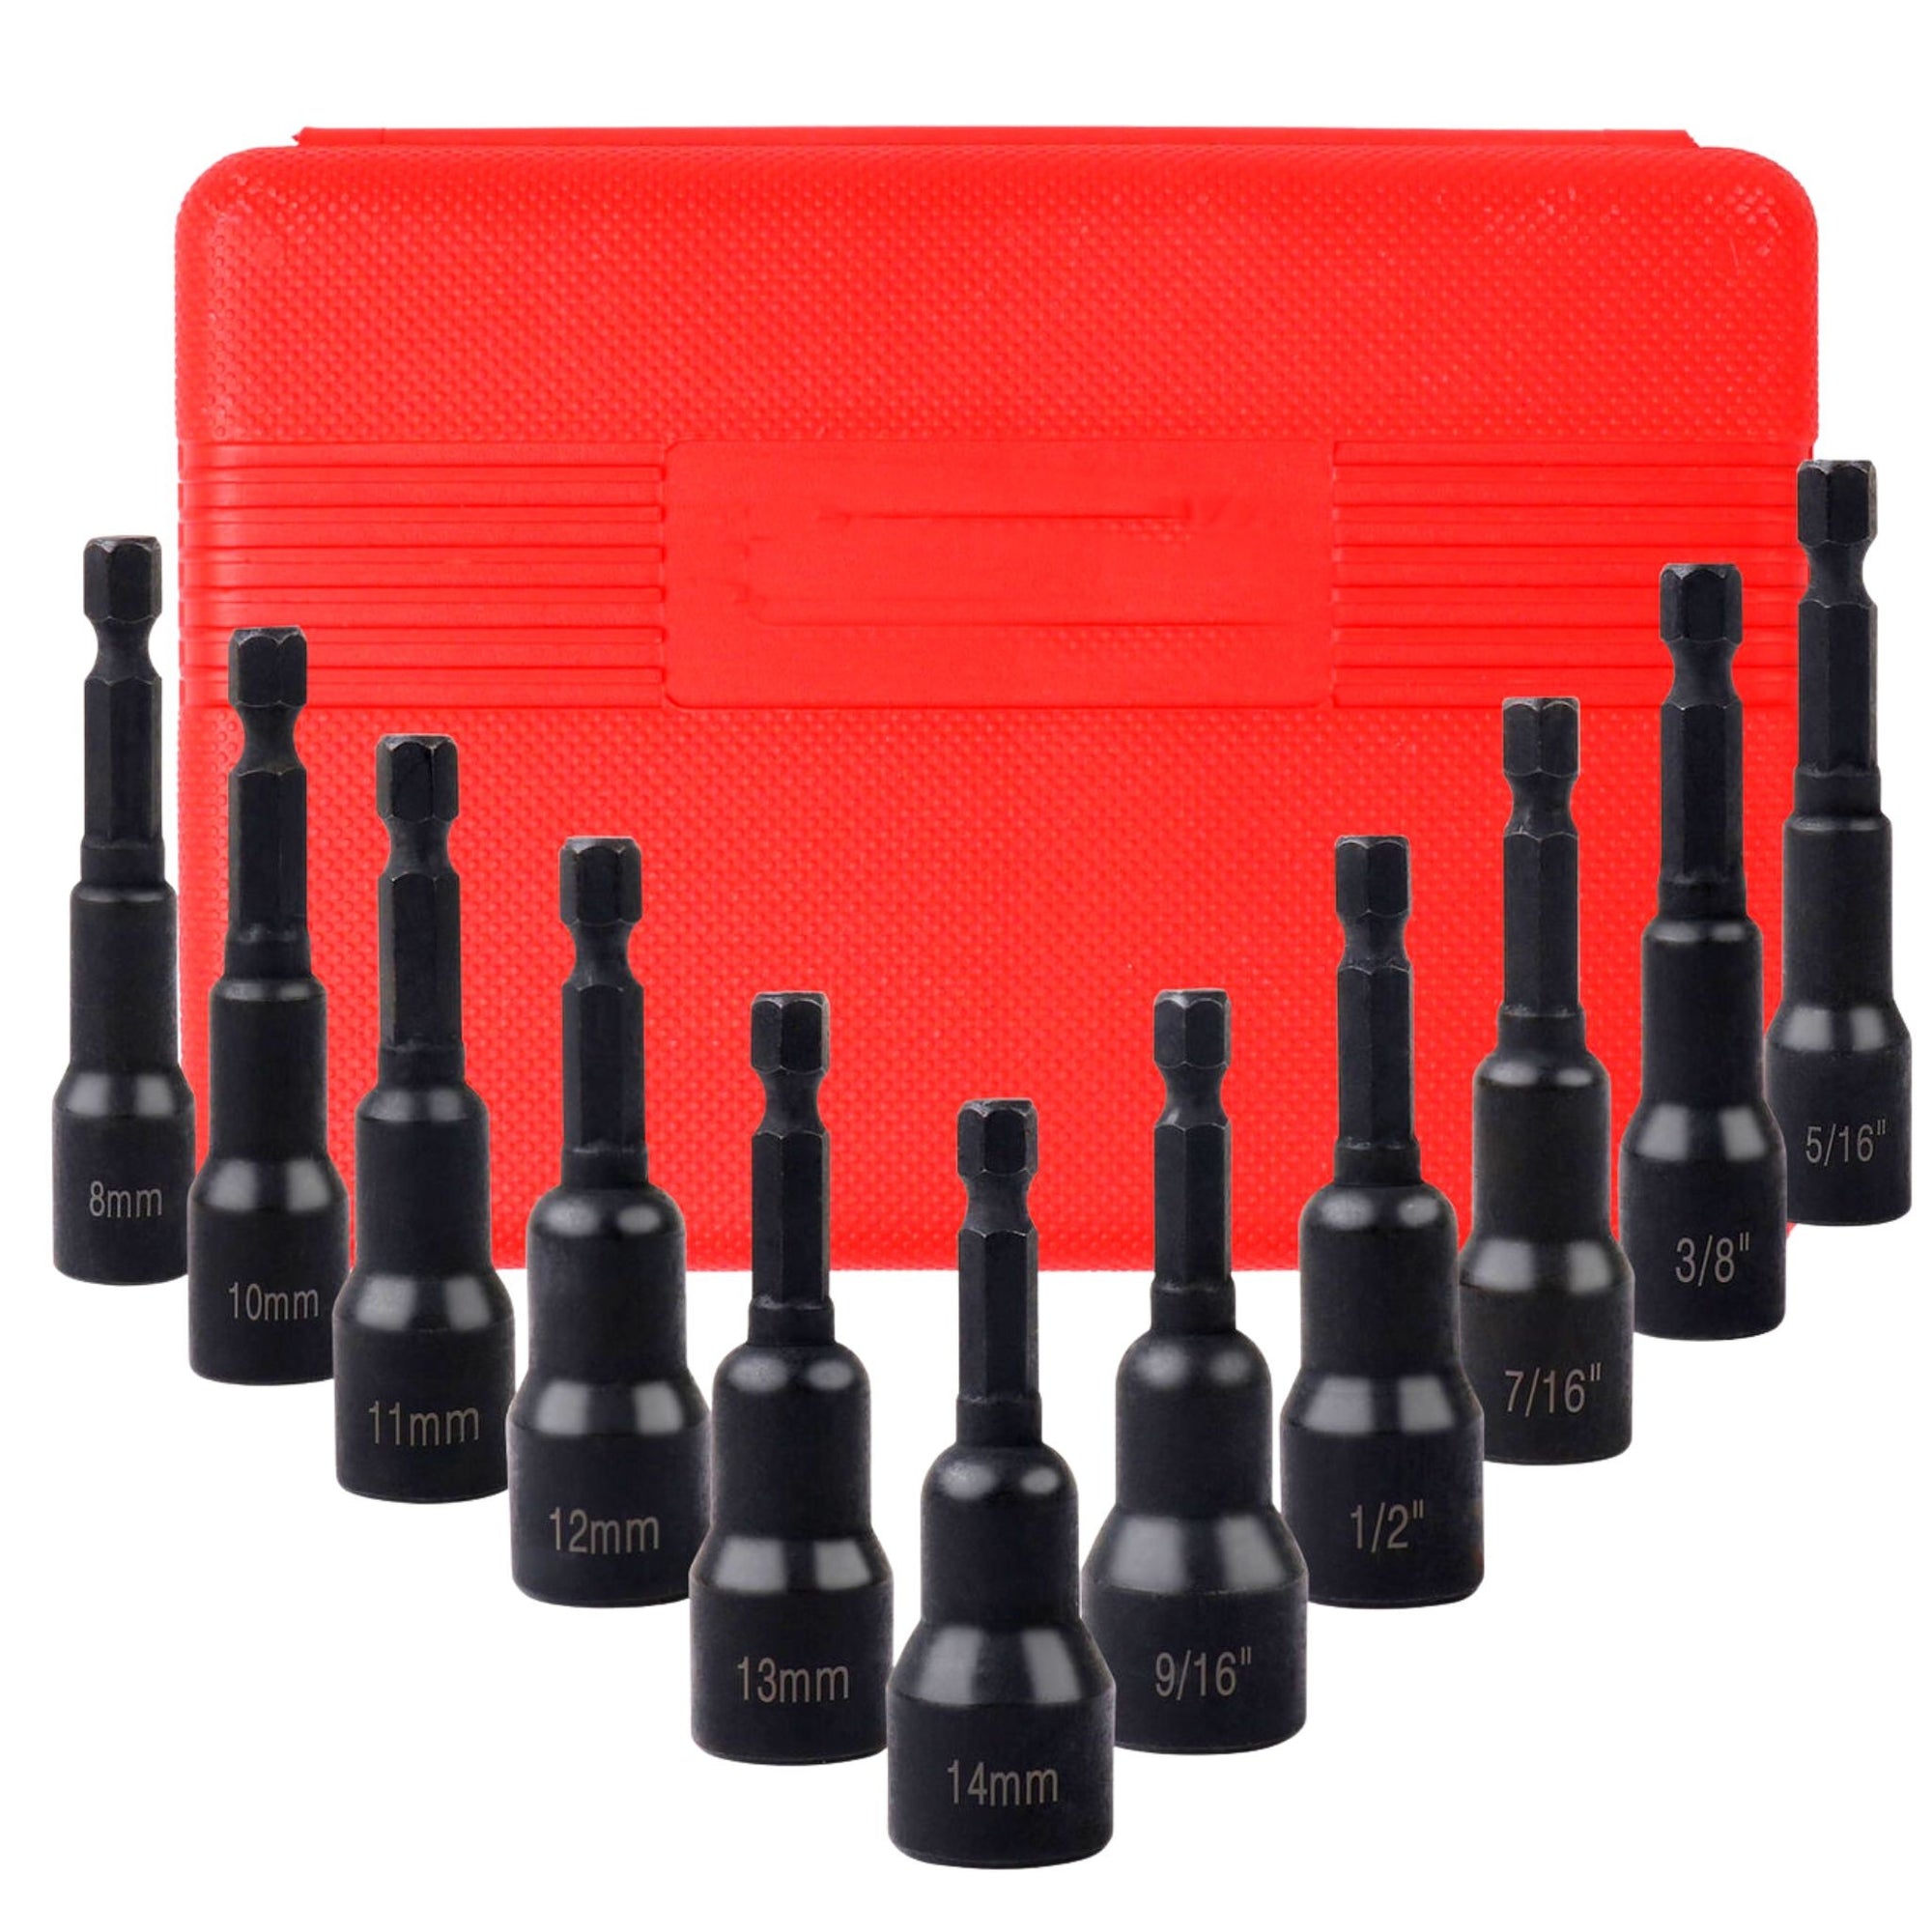 12 Piece Magnetic Hex Nut Driver Master Kit | 1/4" | Hex Shank | SAE & Metric - South East Clearance Centre